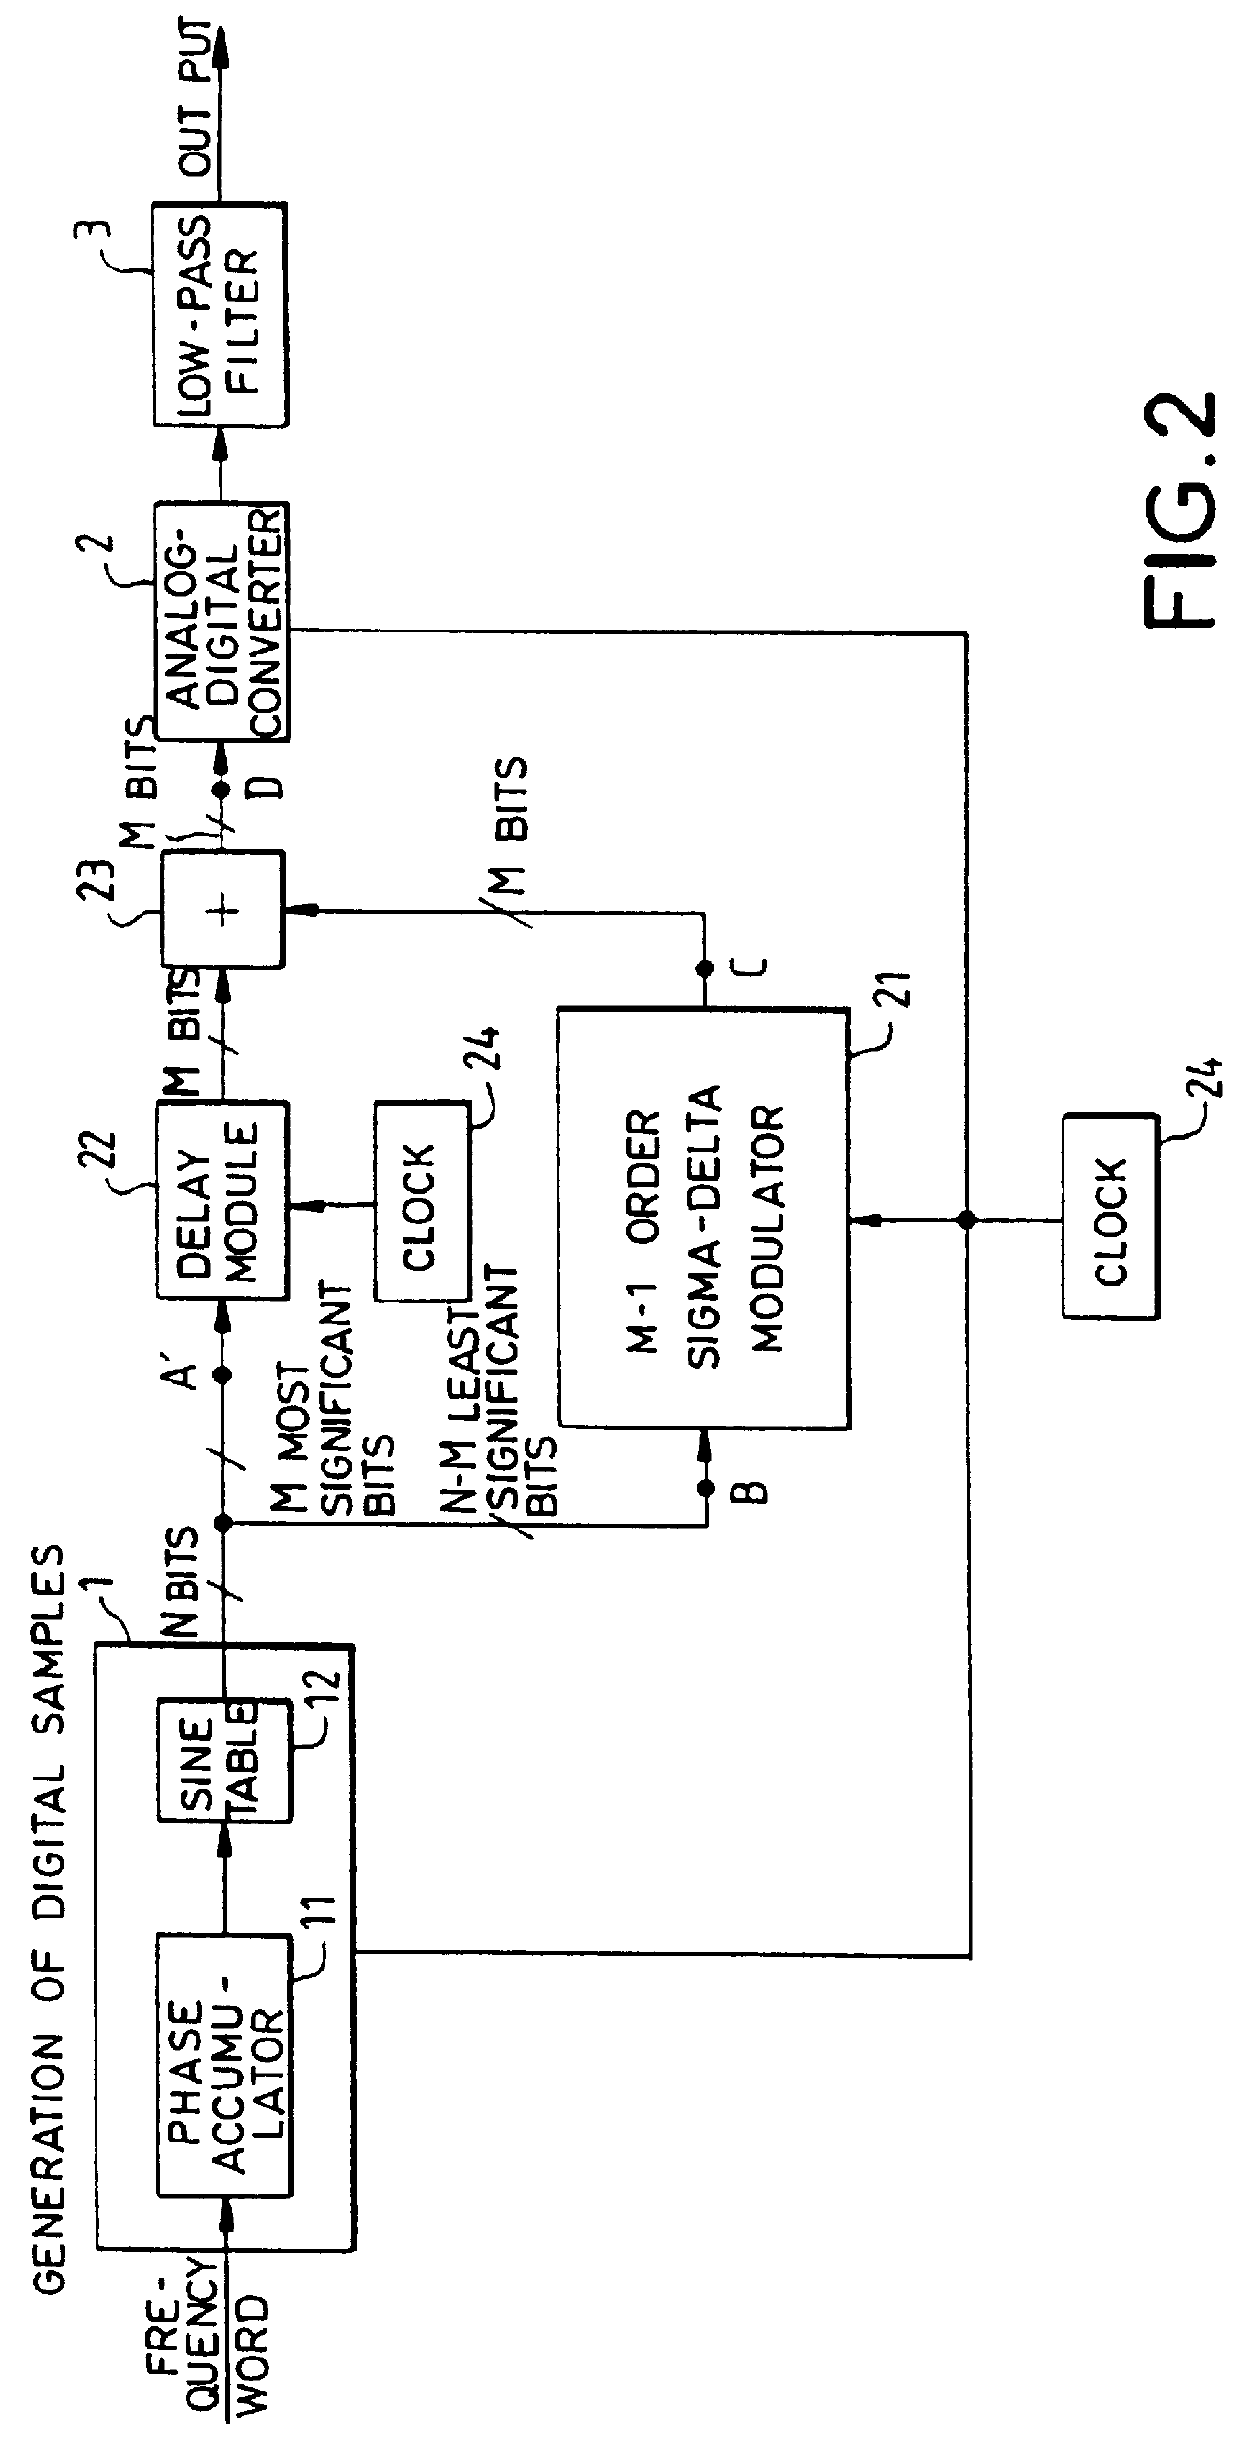 Device for the generation of analog signals through digital-analog converters, especially for direct digital synthesis